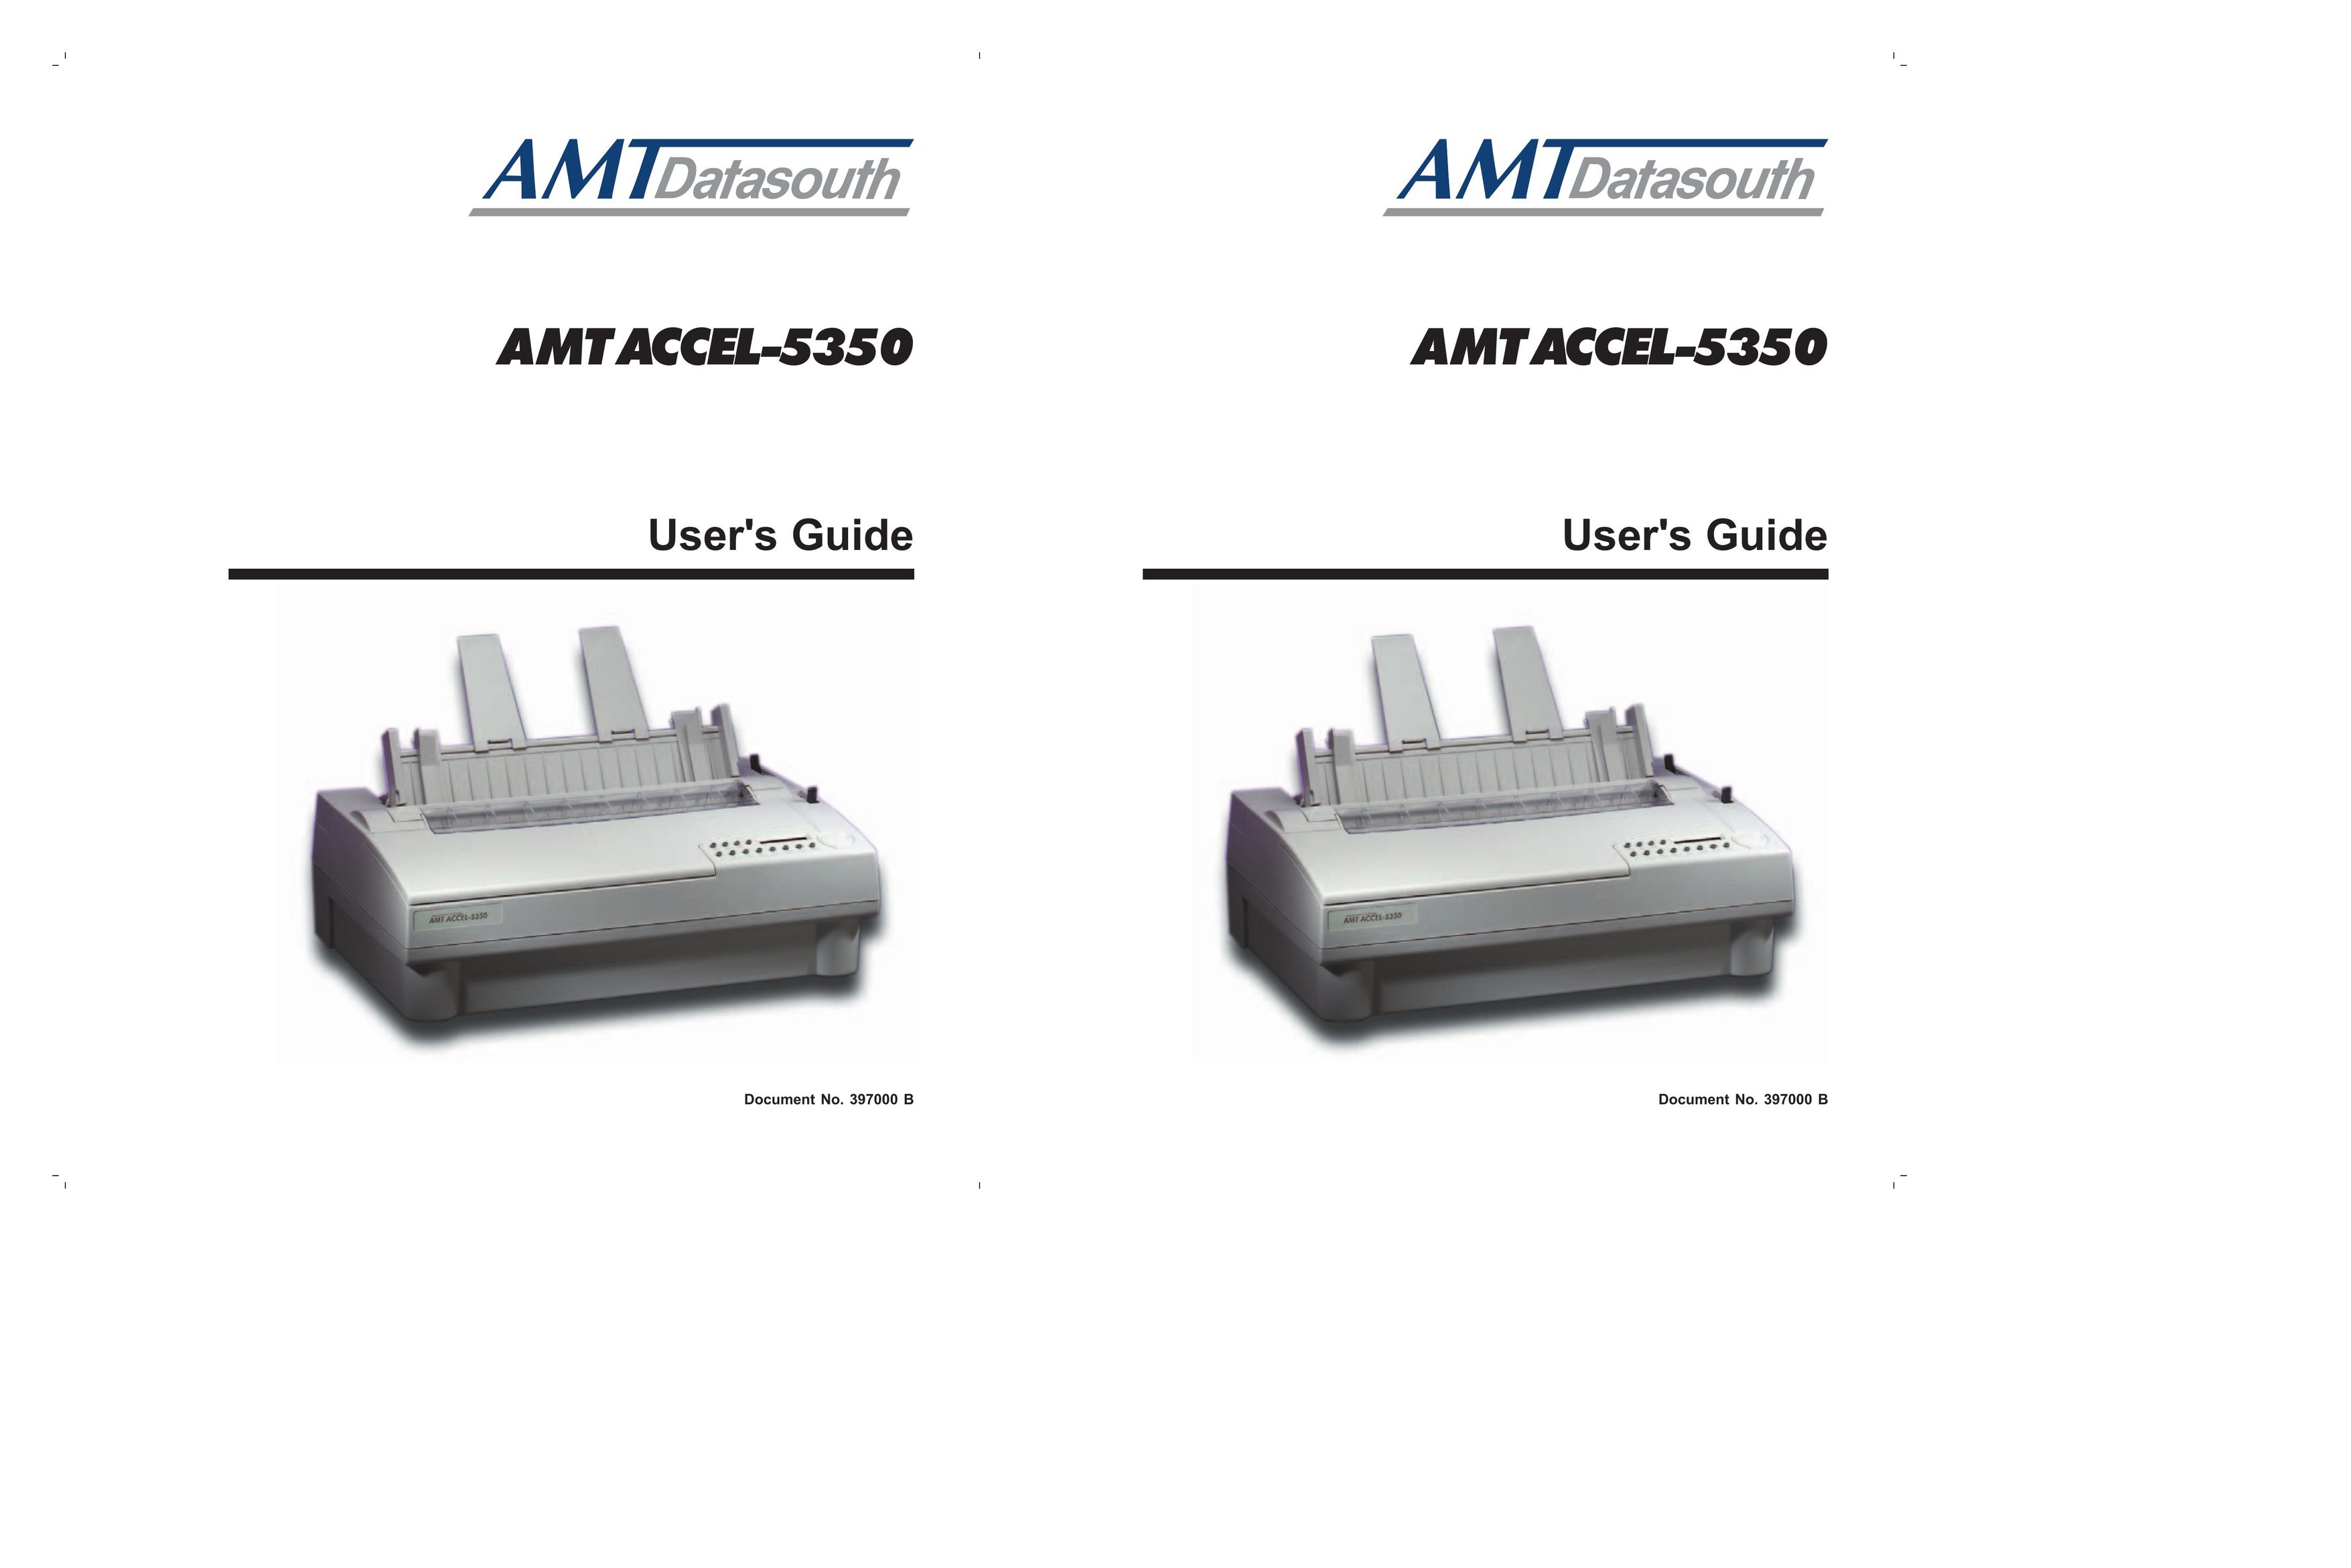 AMT Datasouth AMTACCEL-5350 Printer User Manual (Page 1)